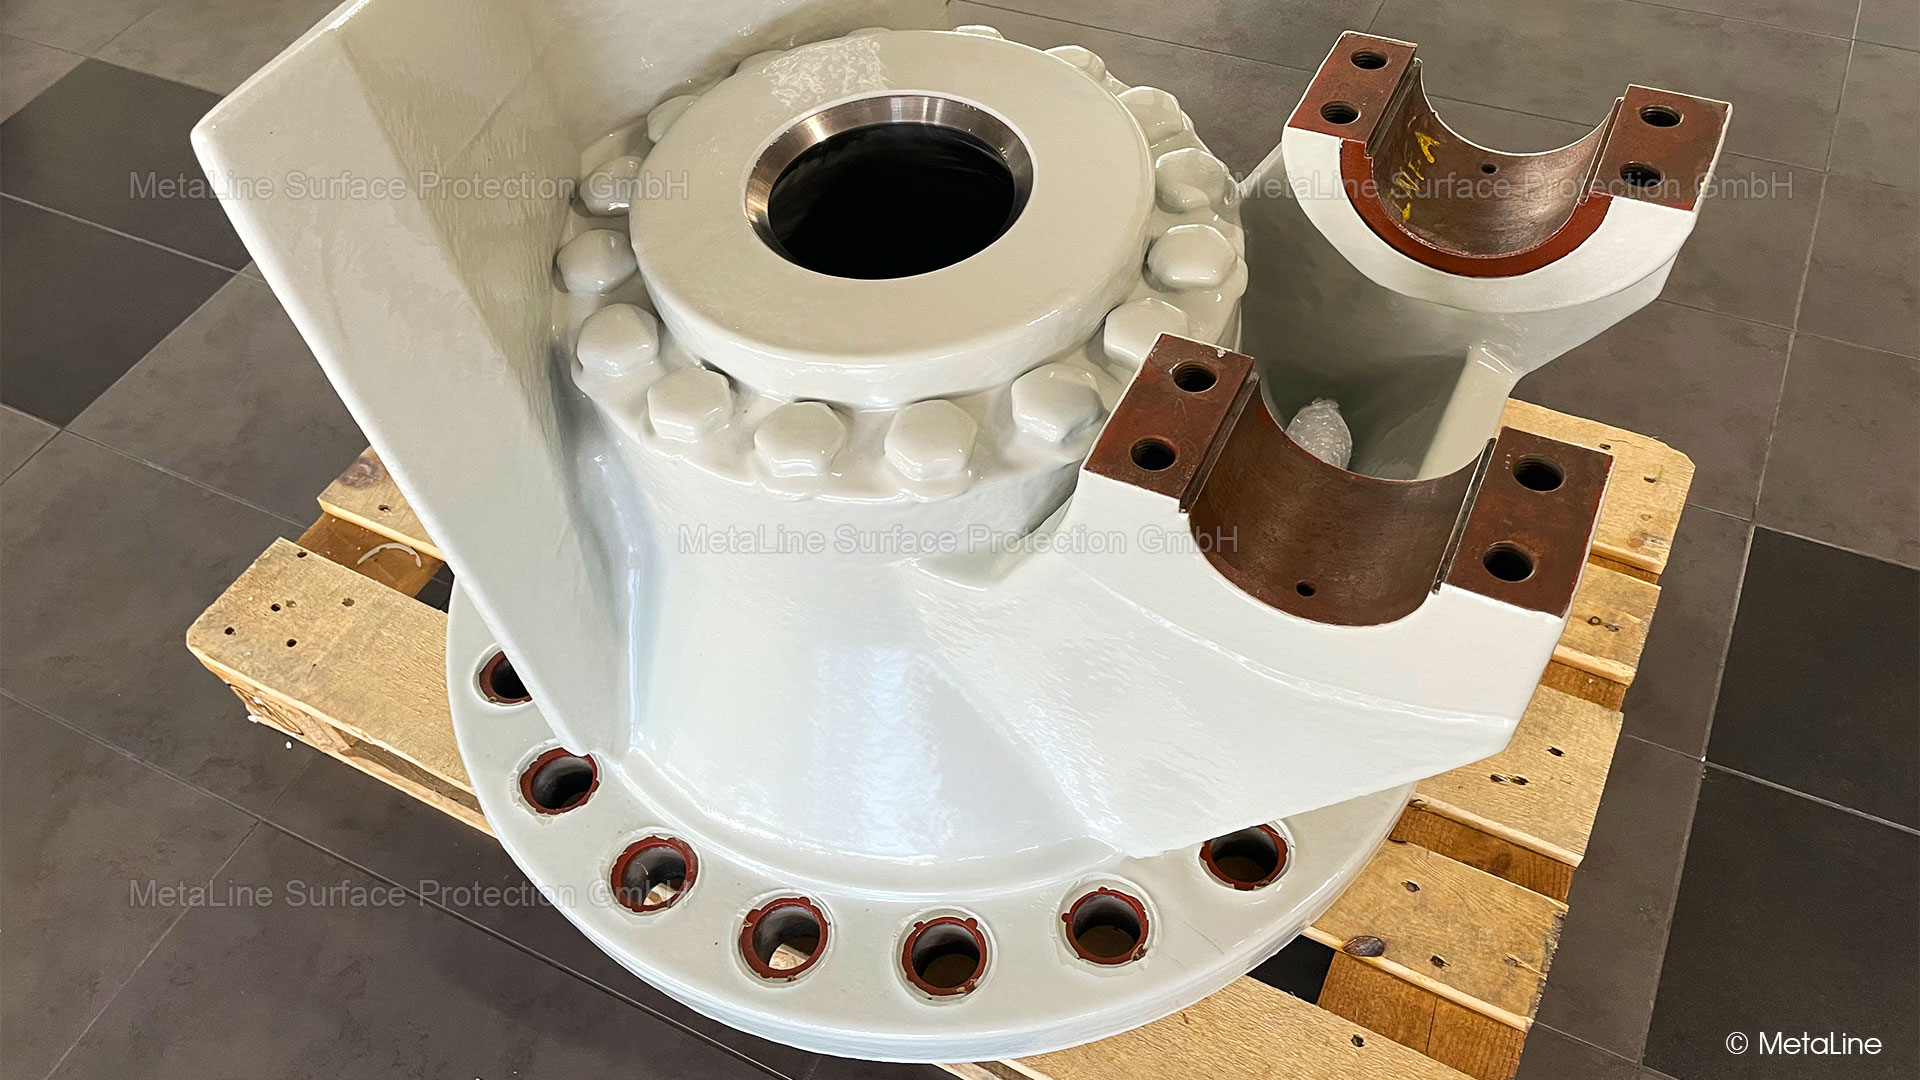 <!-- START: ConditionalContent --><!-- END: ConditionalContent -->   <!-- START: ConditionalContent --> Impeller; Turbine; Kaplan; Francis; Wear; Erosion; Corrosion; Cavitation; Repair; Wear-resistant; Coating; Ceramic; Guide Blade; Guide vane; Wear-resistant;  <!-- END: ConditionalContent -->   <!-- START: ConditionalContent --><!-- END: ConditionalContent -->   <!-- START: ConditionalContent --><!-- END: ConditionalContent -->